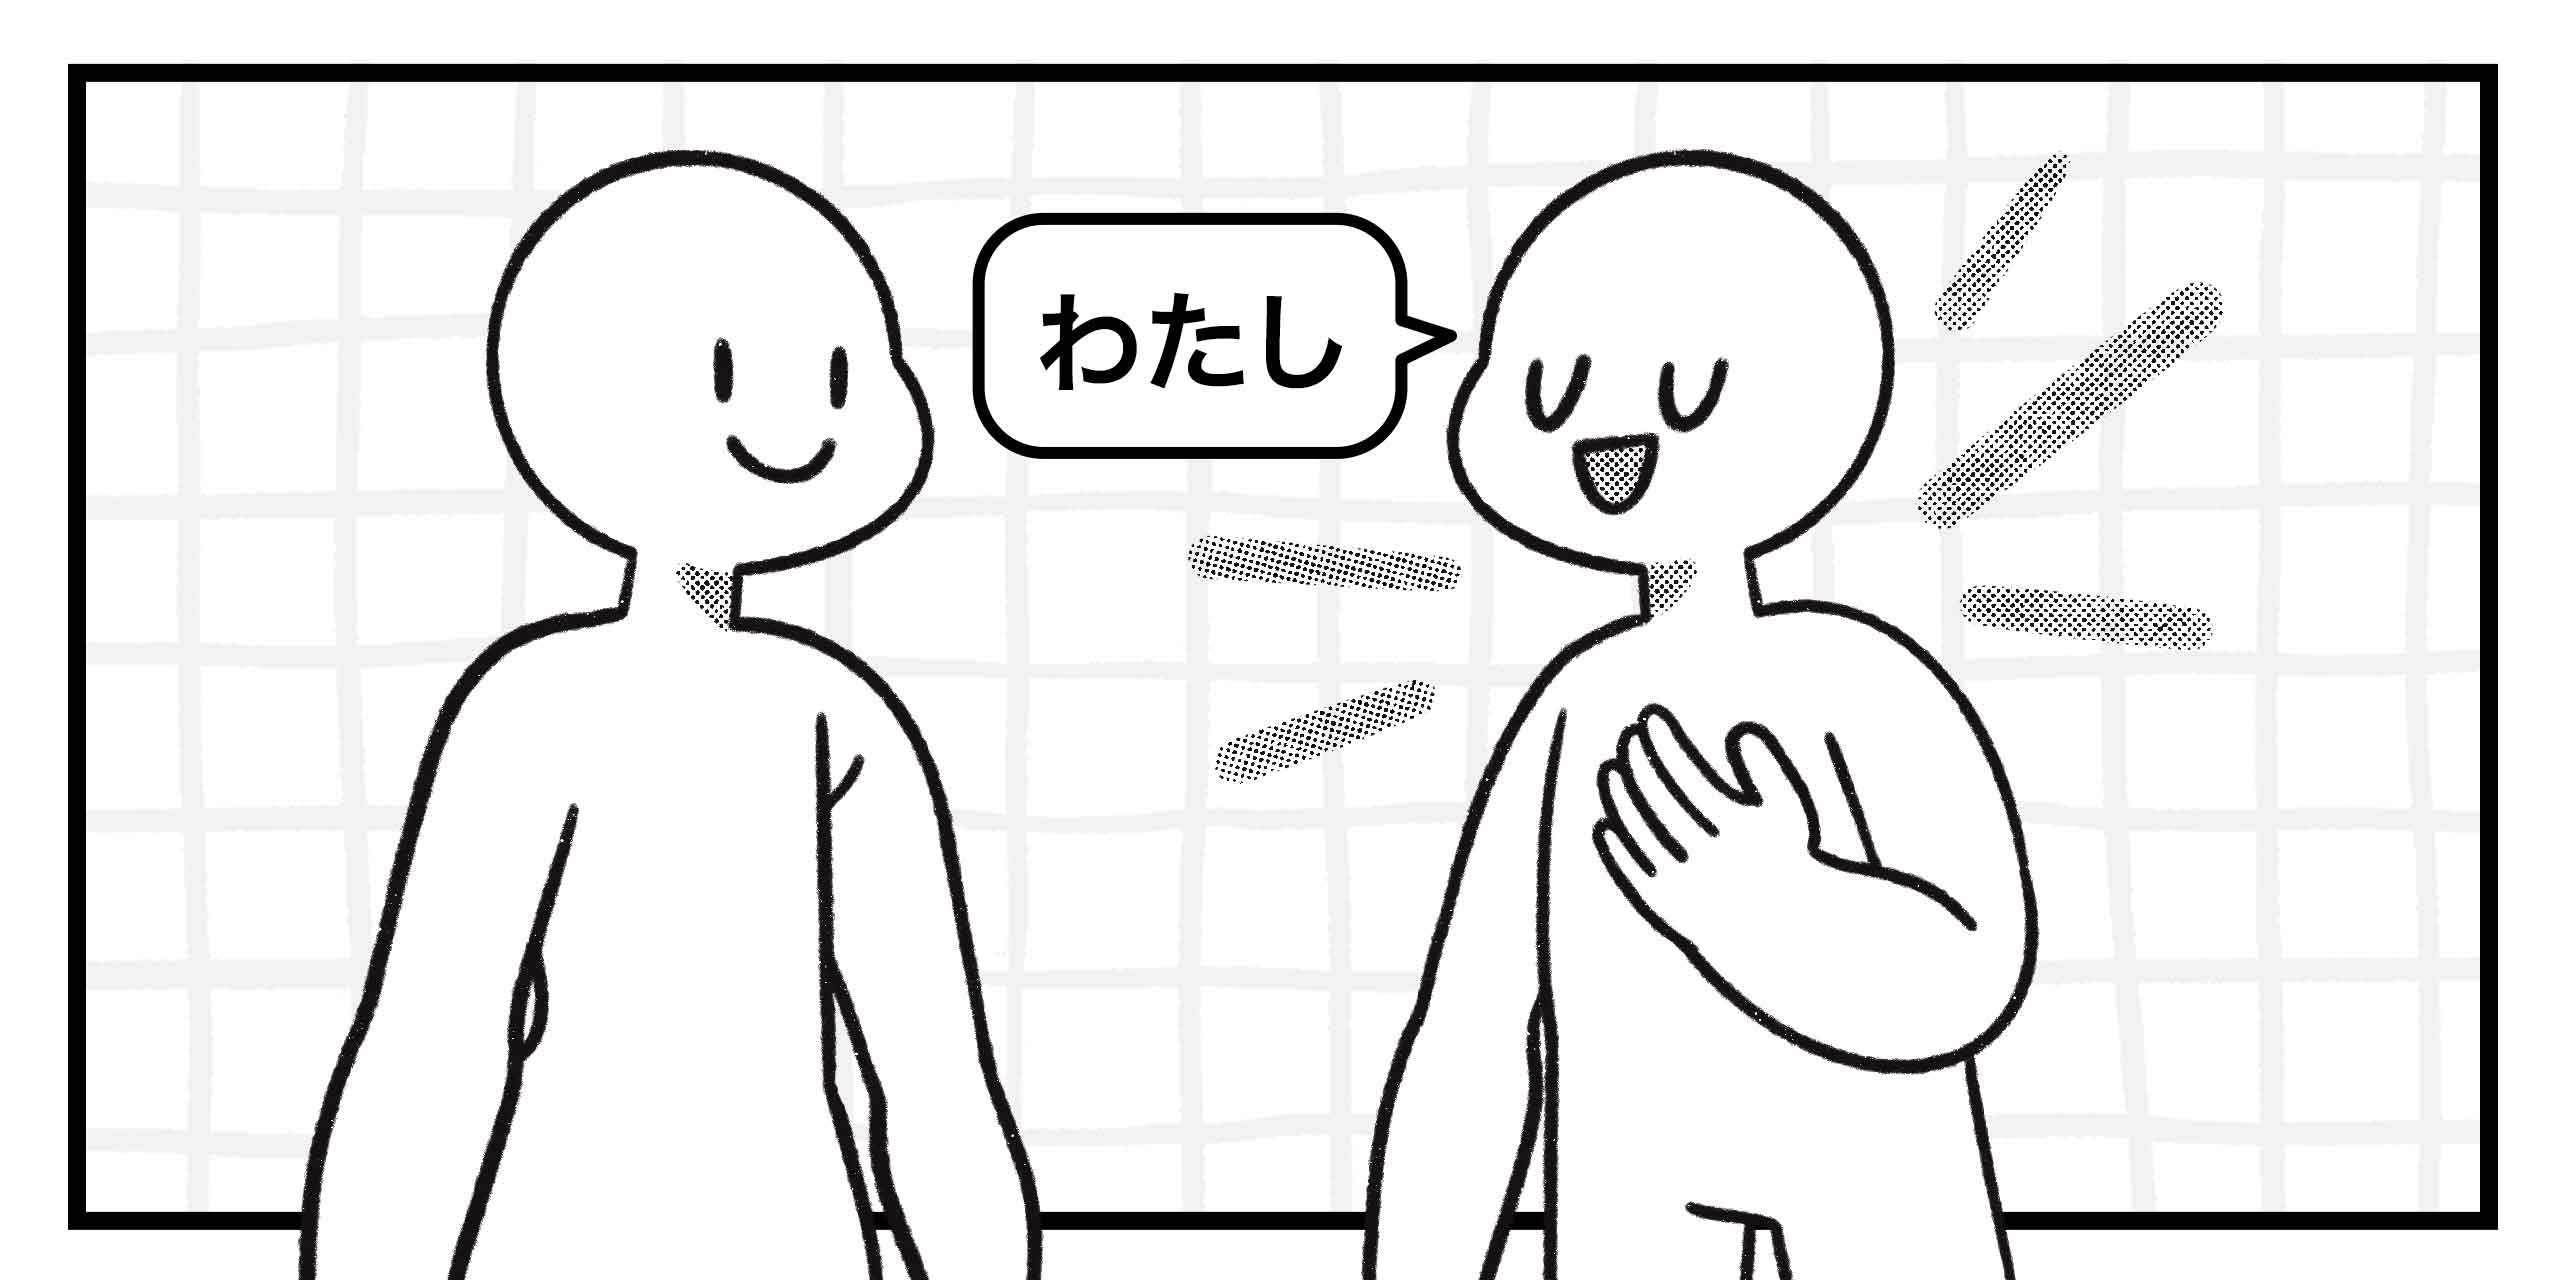 a speaker refering to themselves using a first-person pronoun, わたし